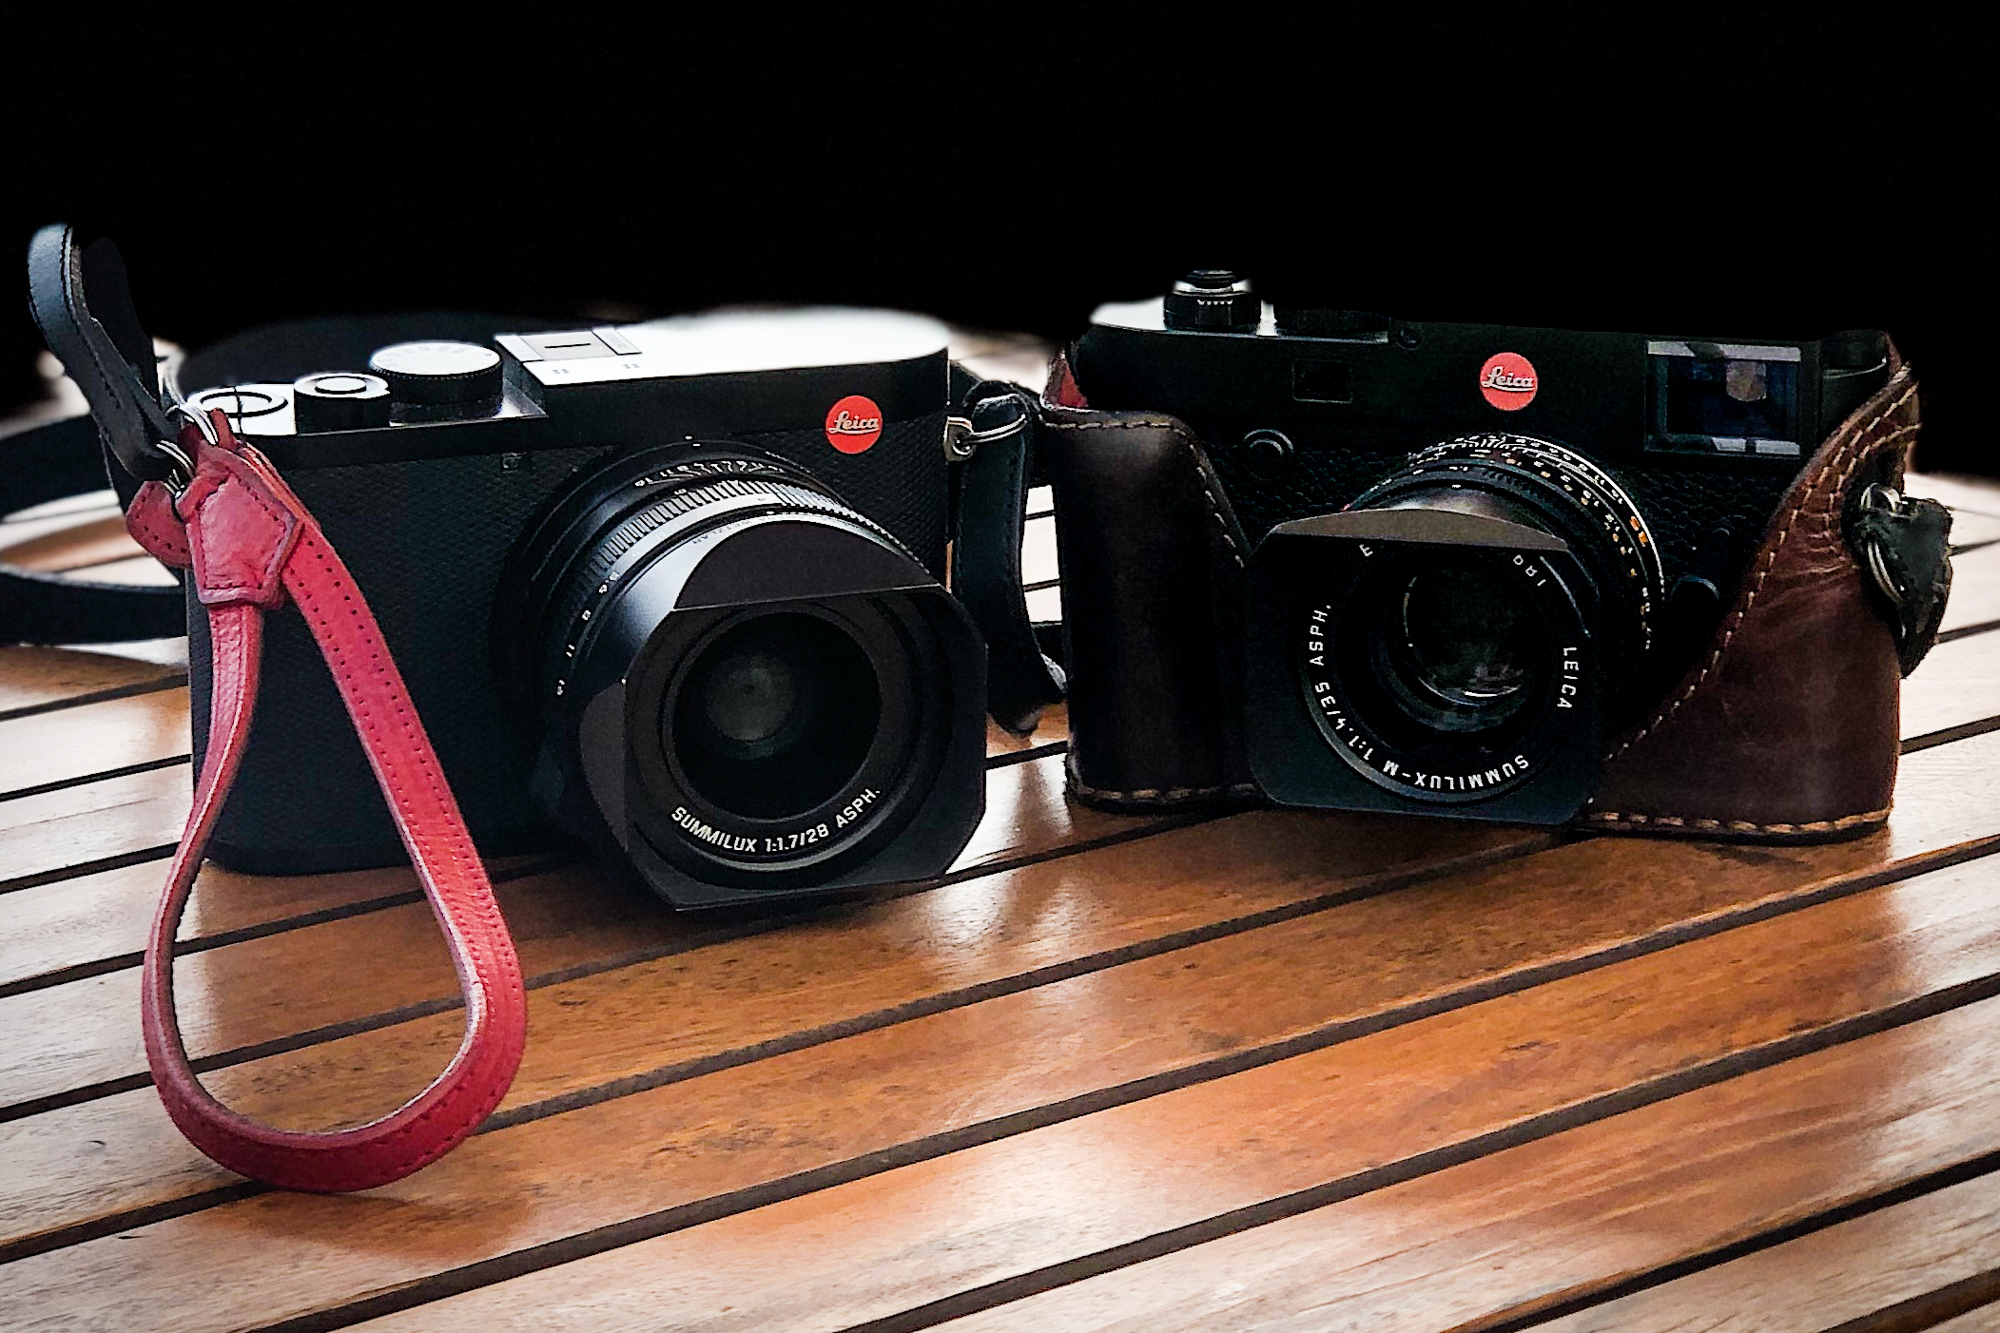 Comparison of the Leica Q2 and Leica M10 — Travel Is Beautiful